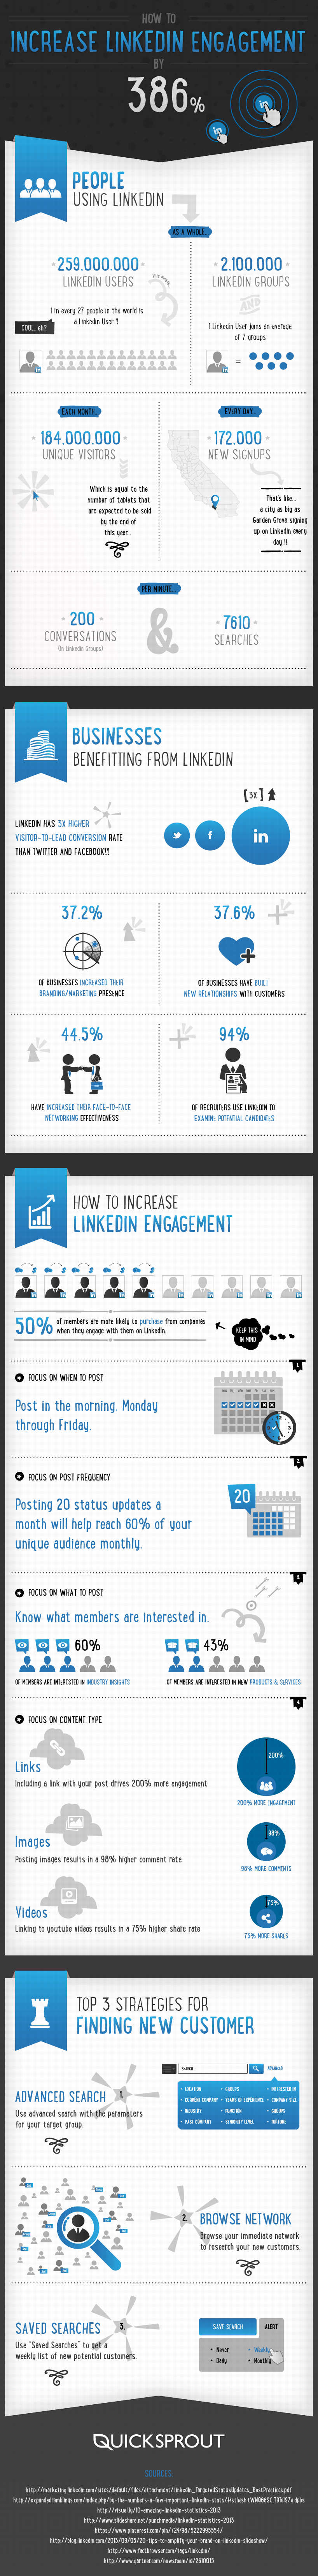 Increase linkedin engagement infographic